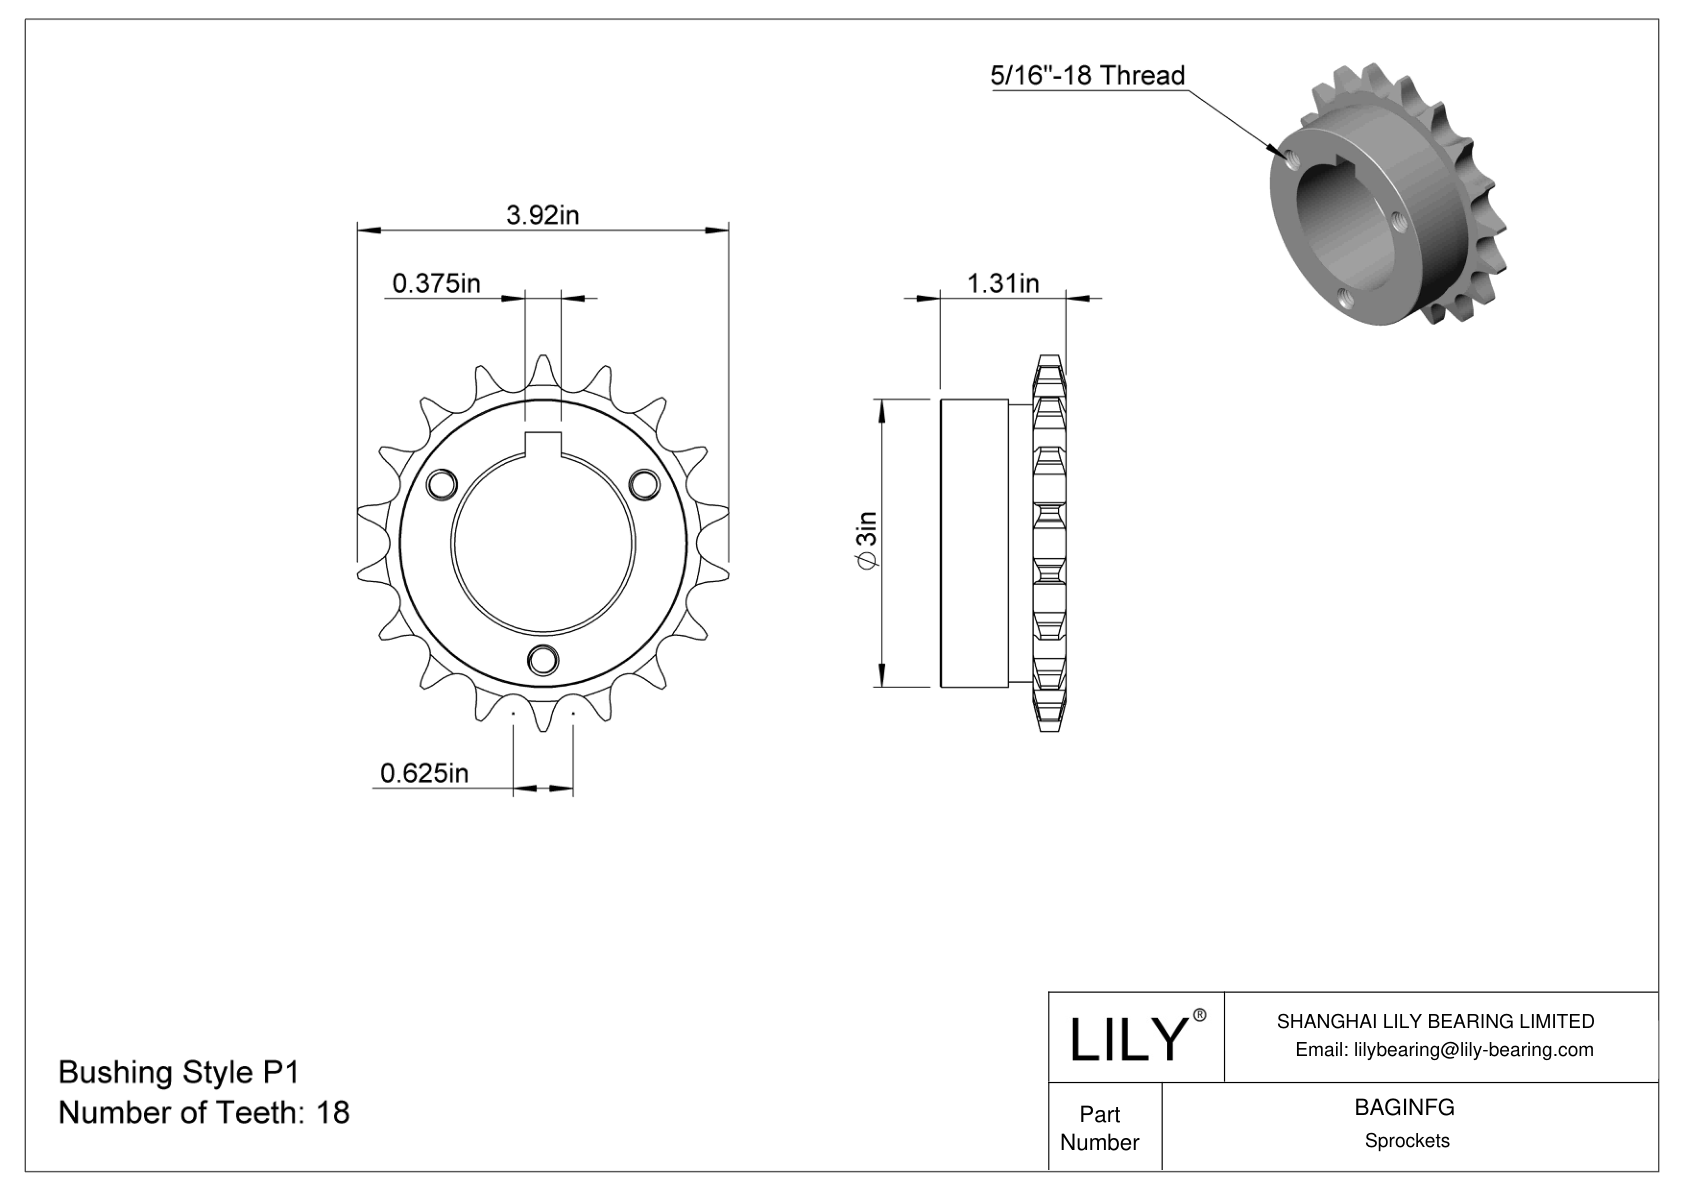 BAGINFG Split-Tapered Bushing-Bore Sprockets for ANSI Roller Chain cad drawing